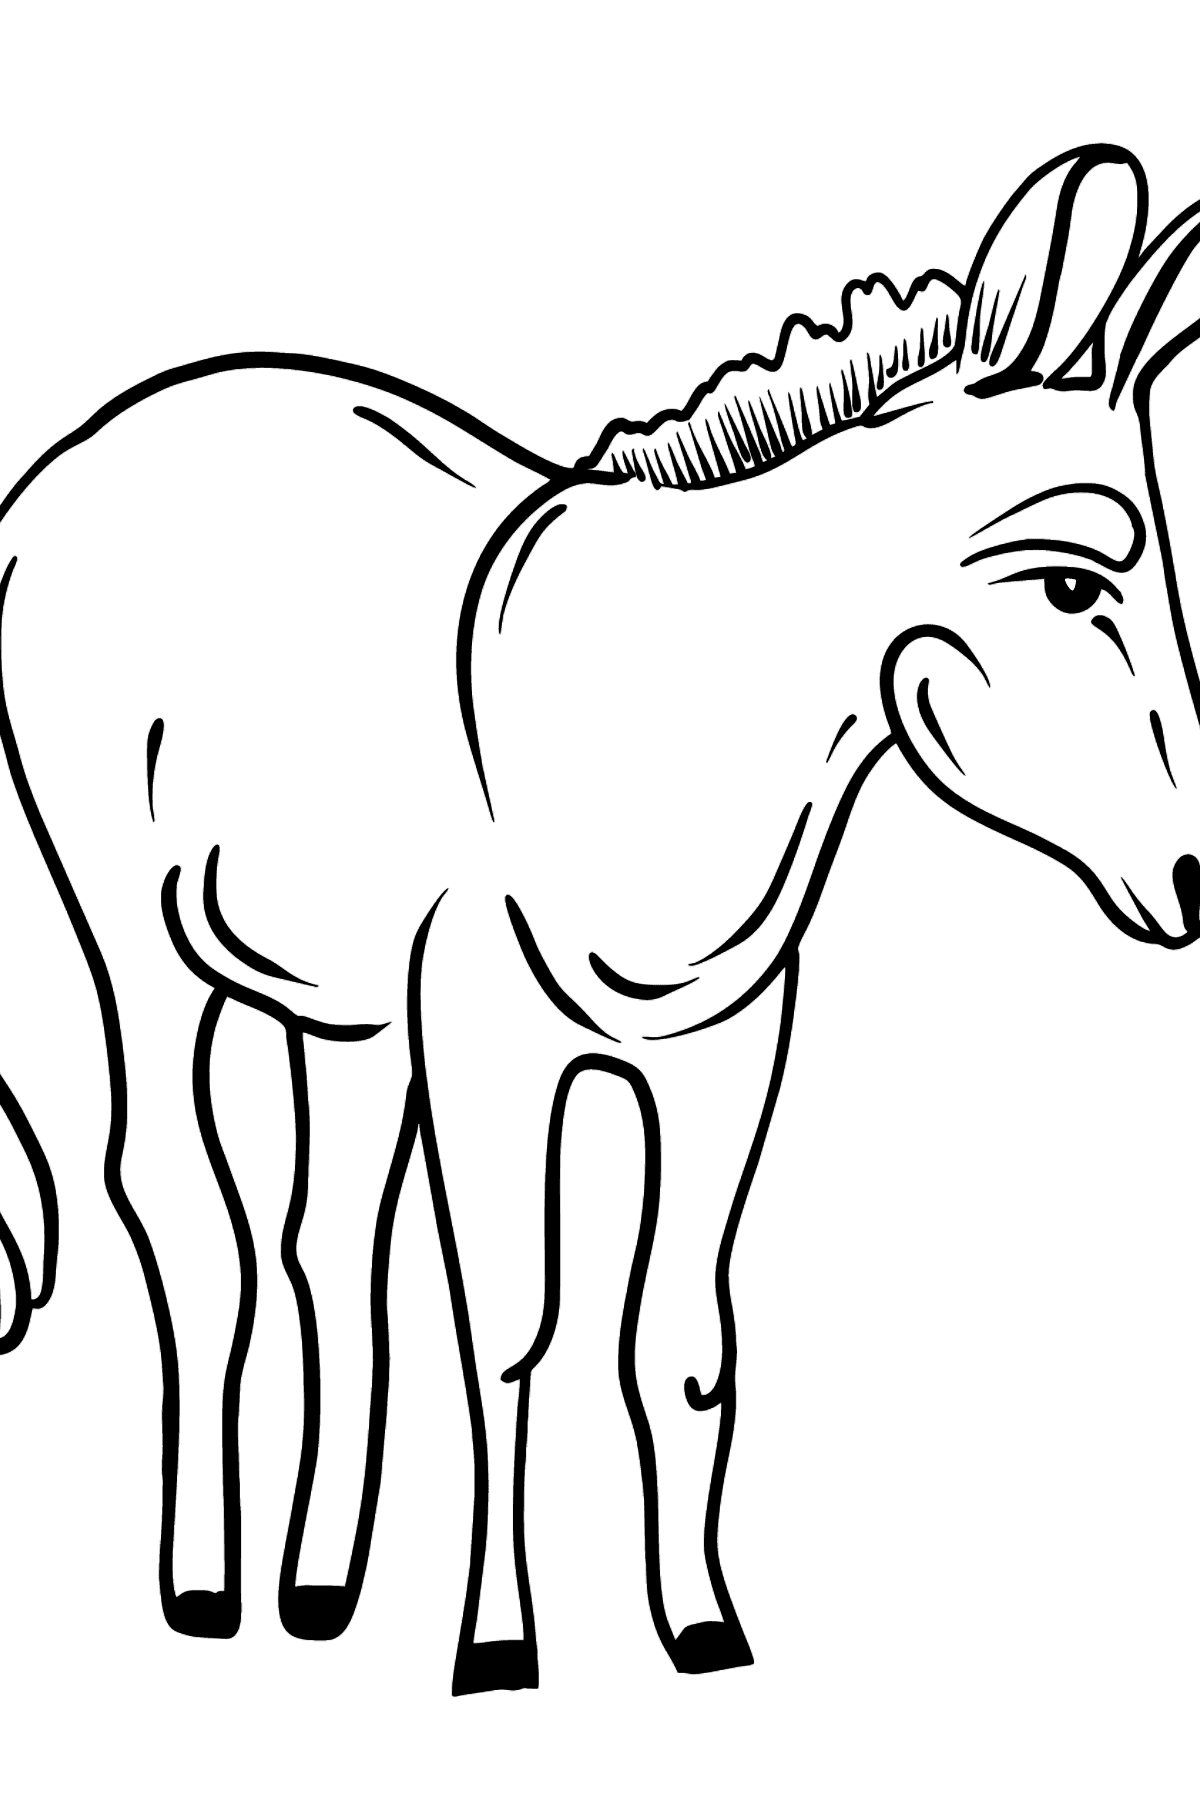 Donkey coloring page - Coloring Pages for Kids